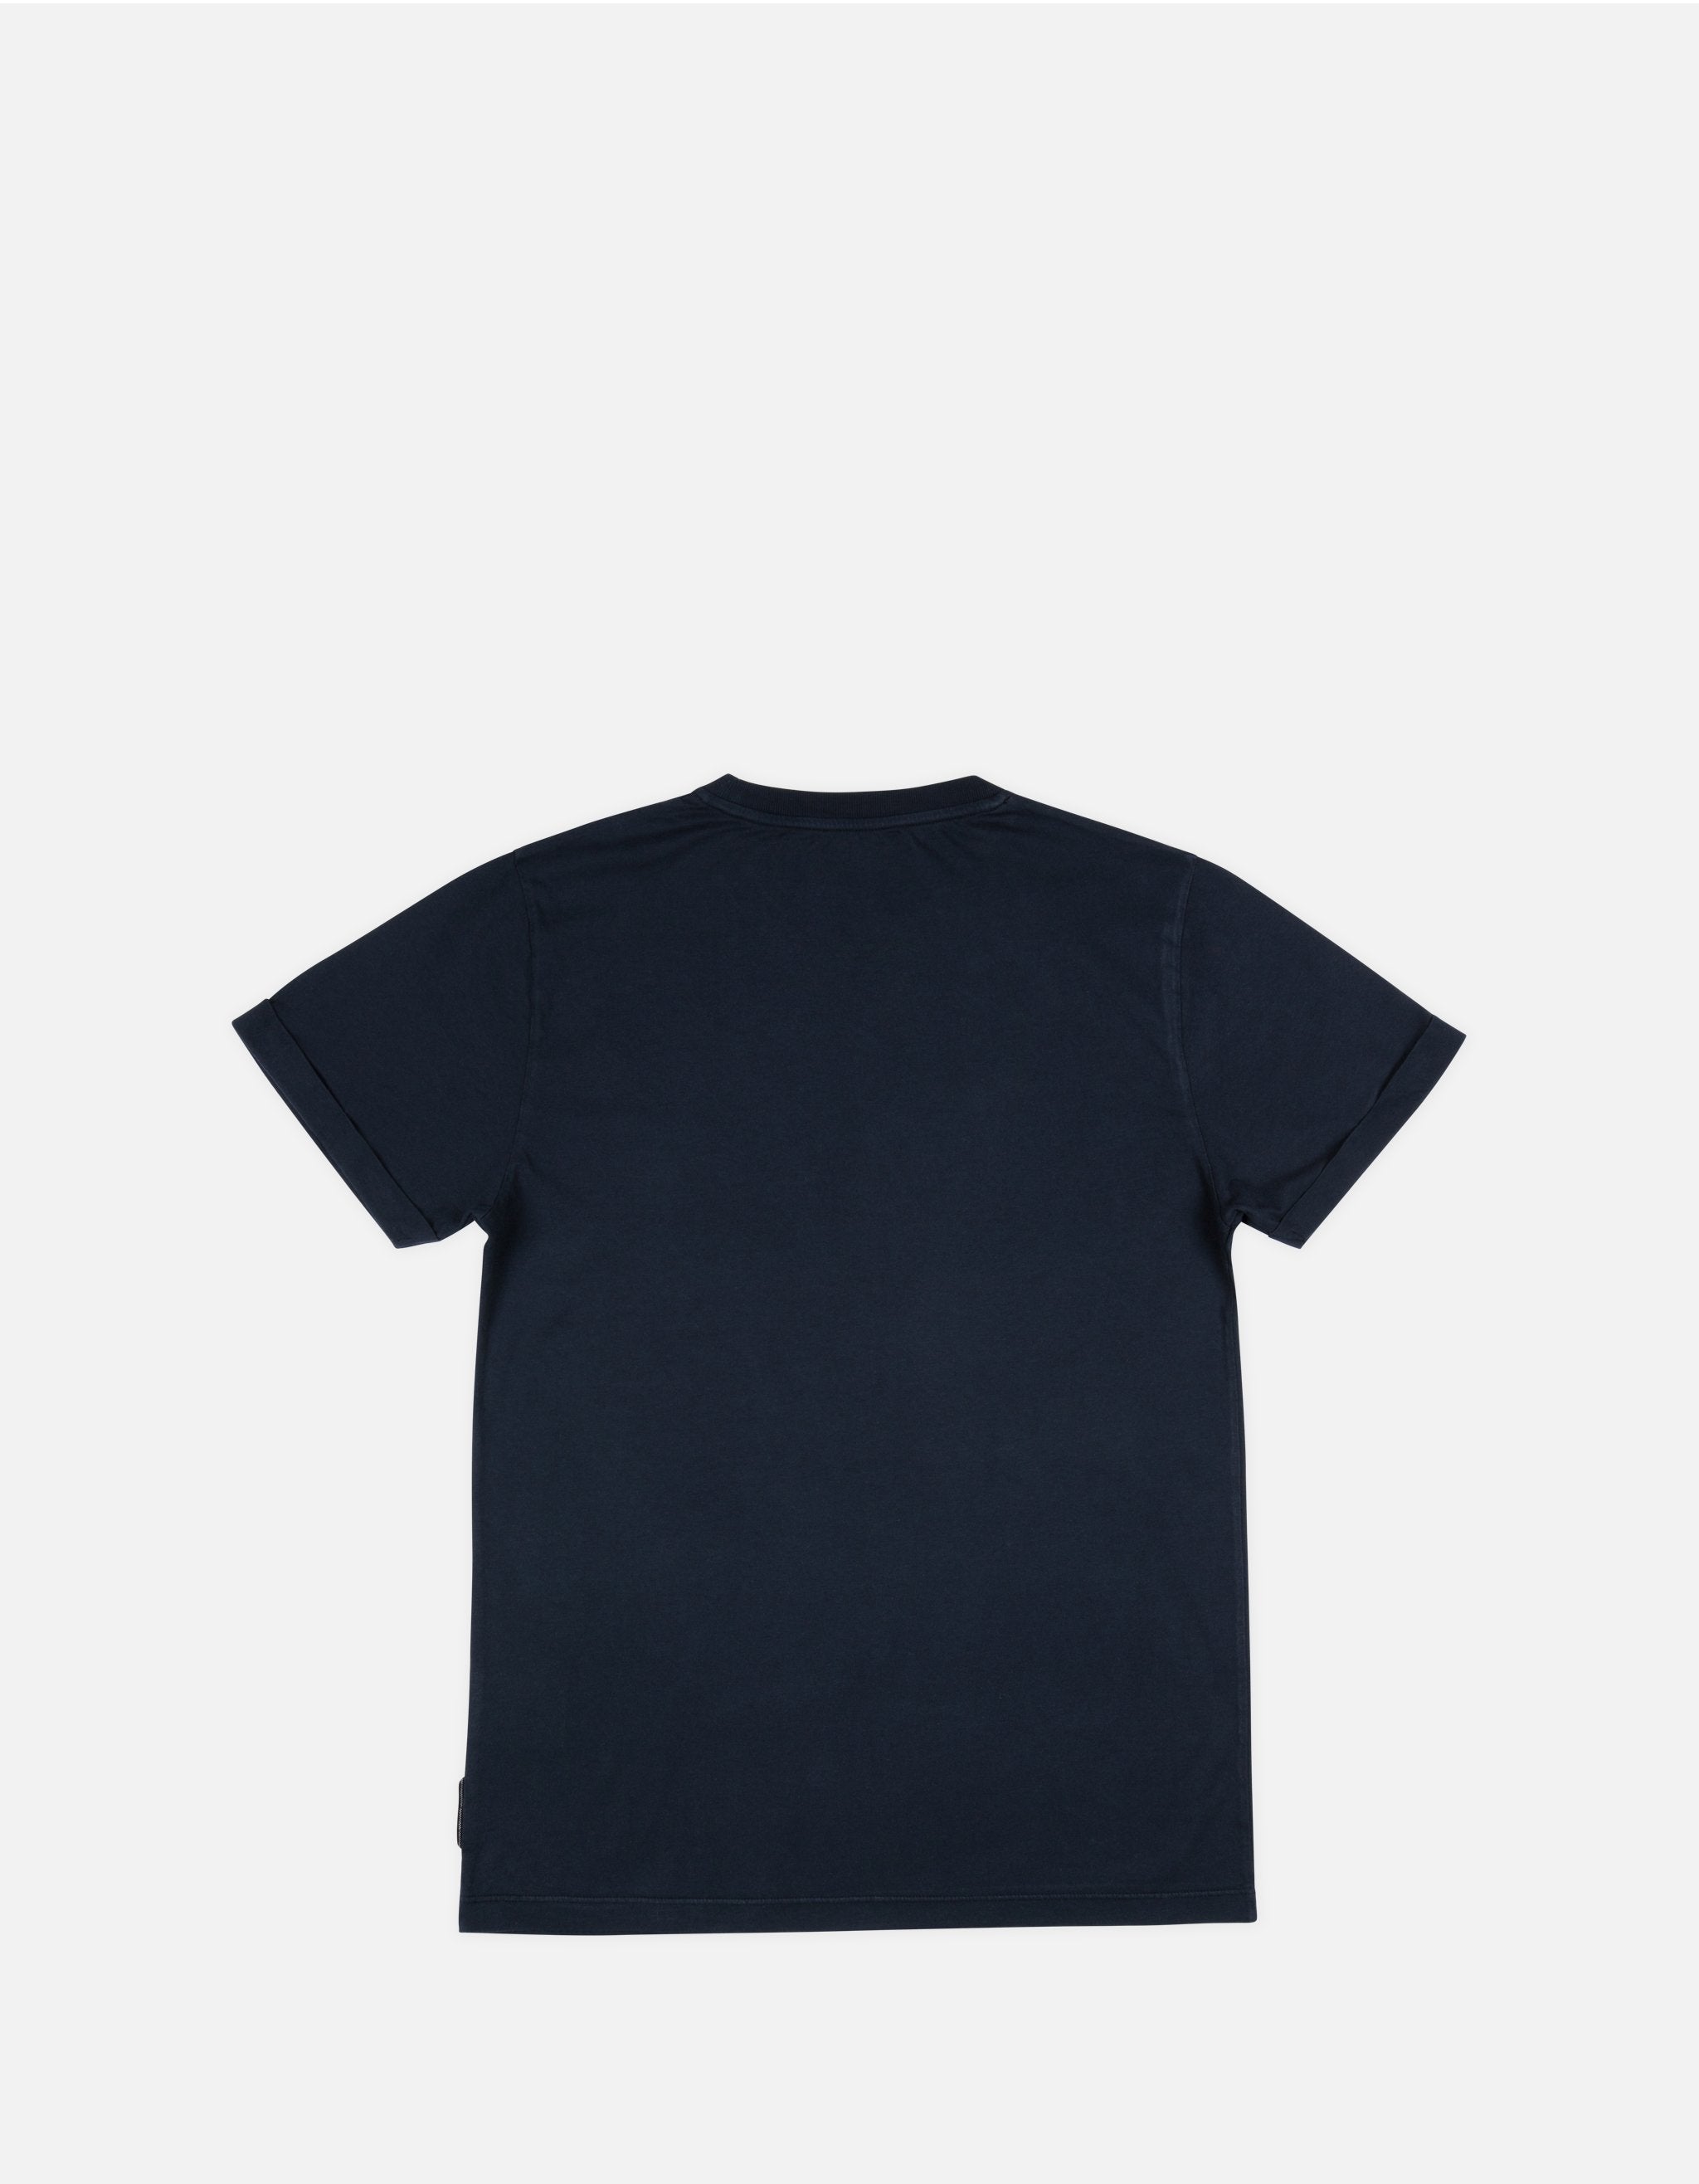 Jofe - 01. Navy - Embroidered